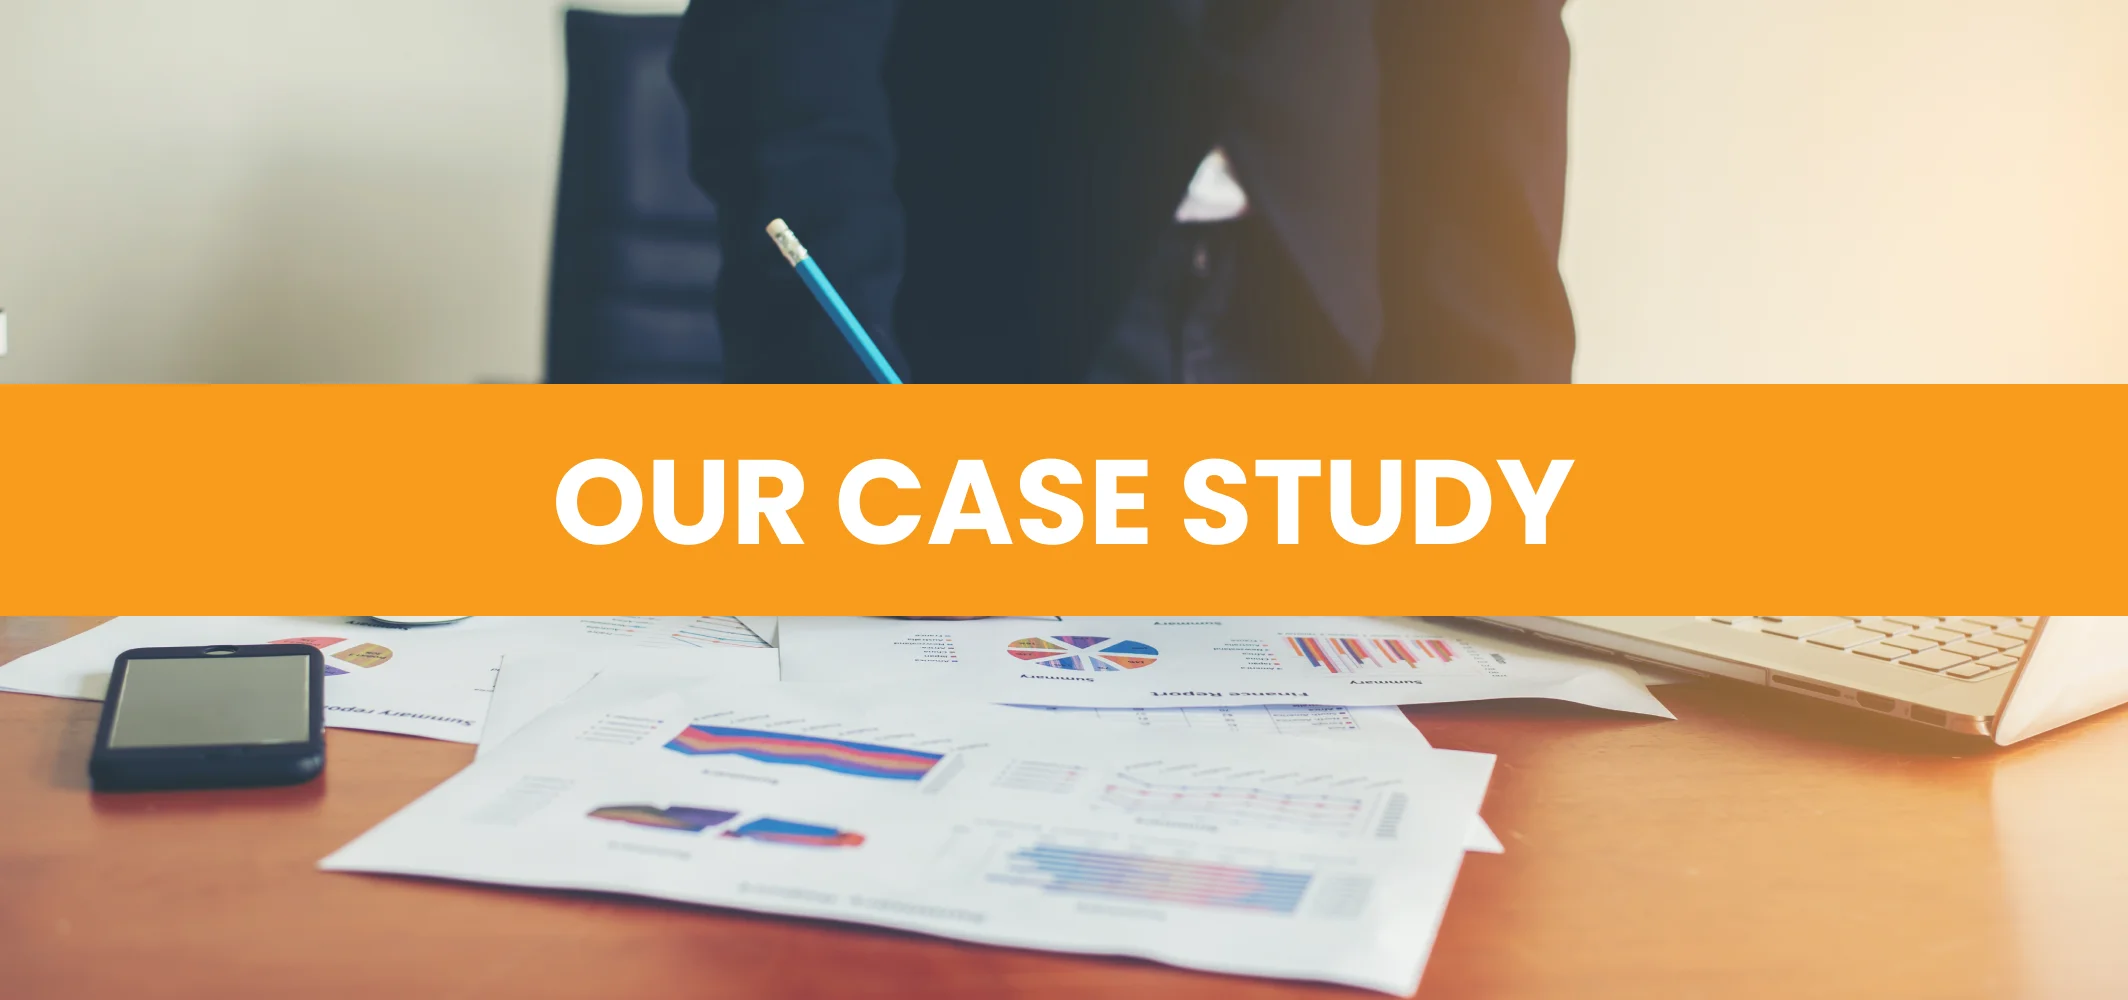 Our Case Study